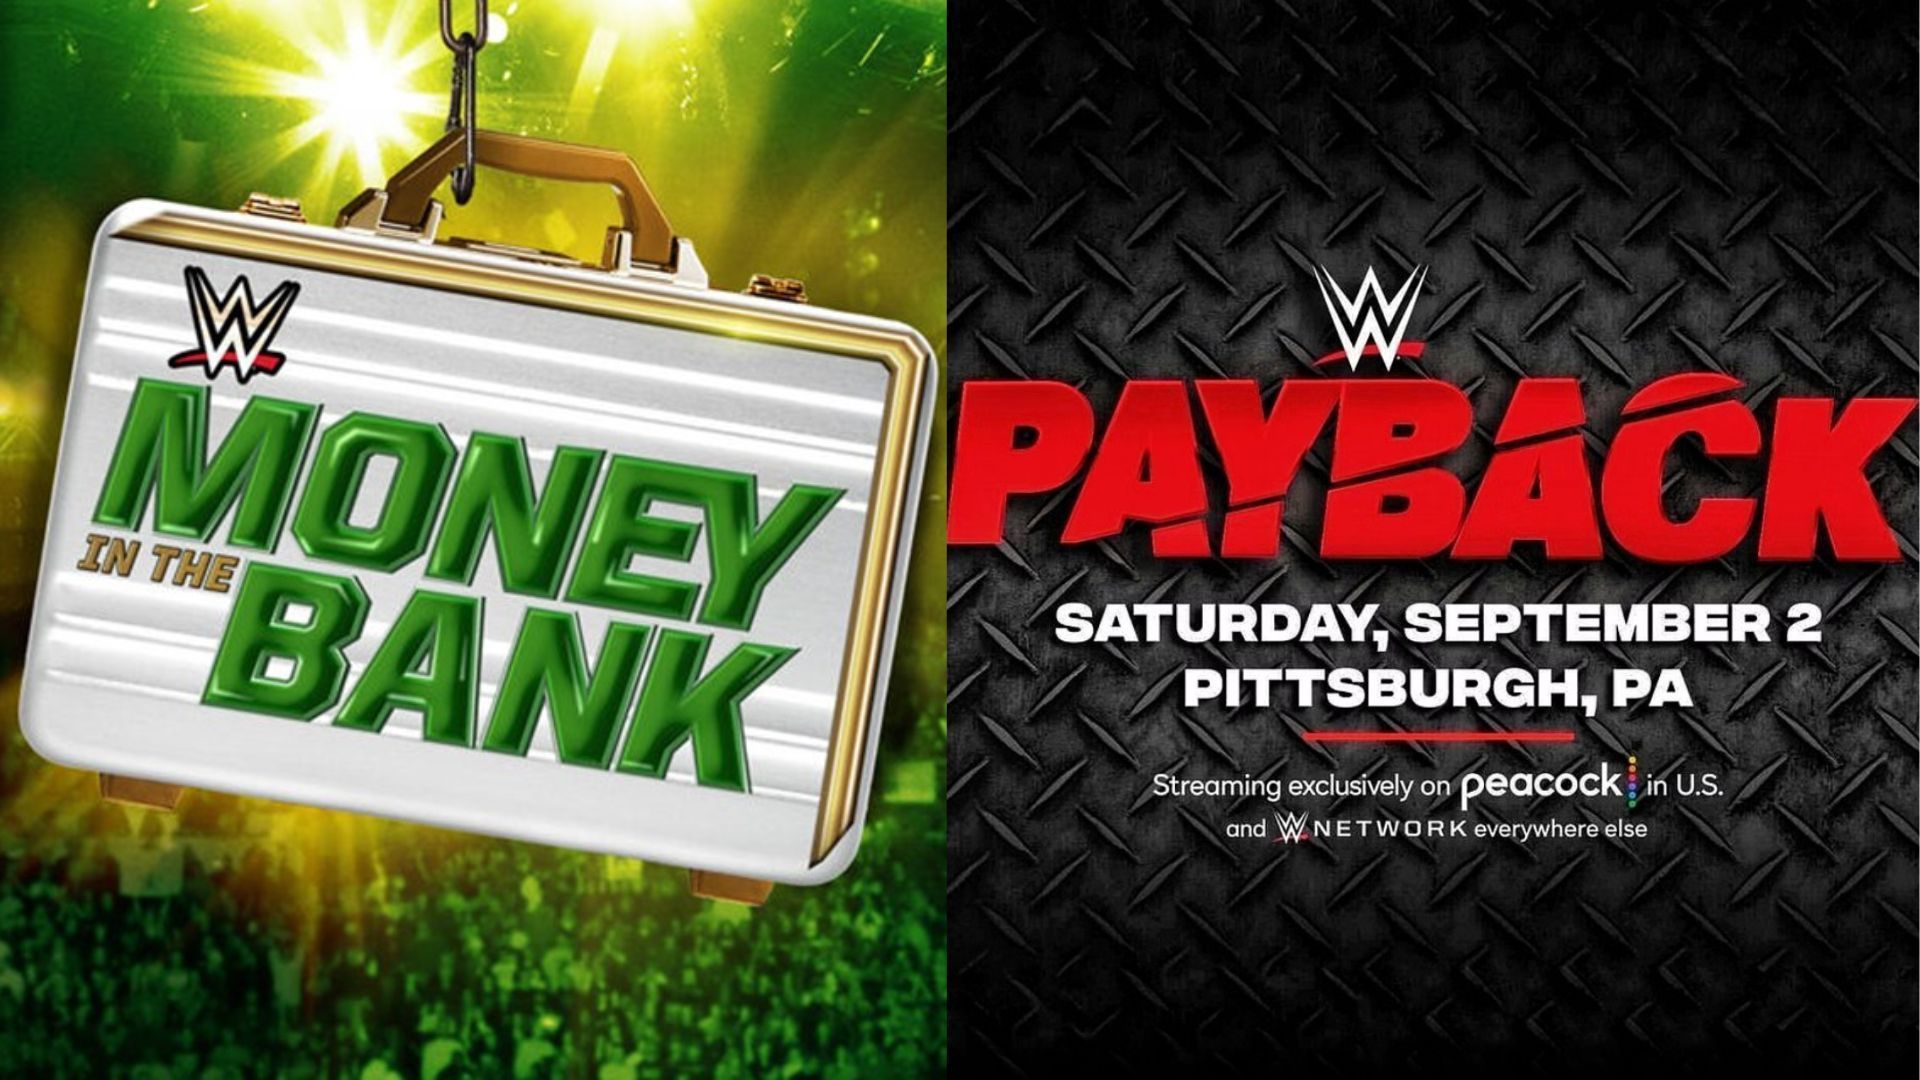 Payback airs live this Saturday in Pittsburgh.